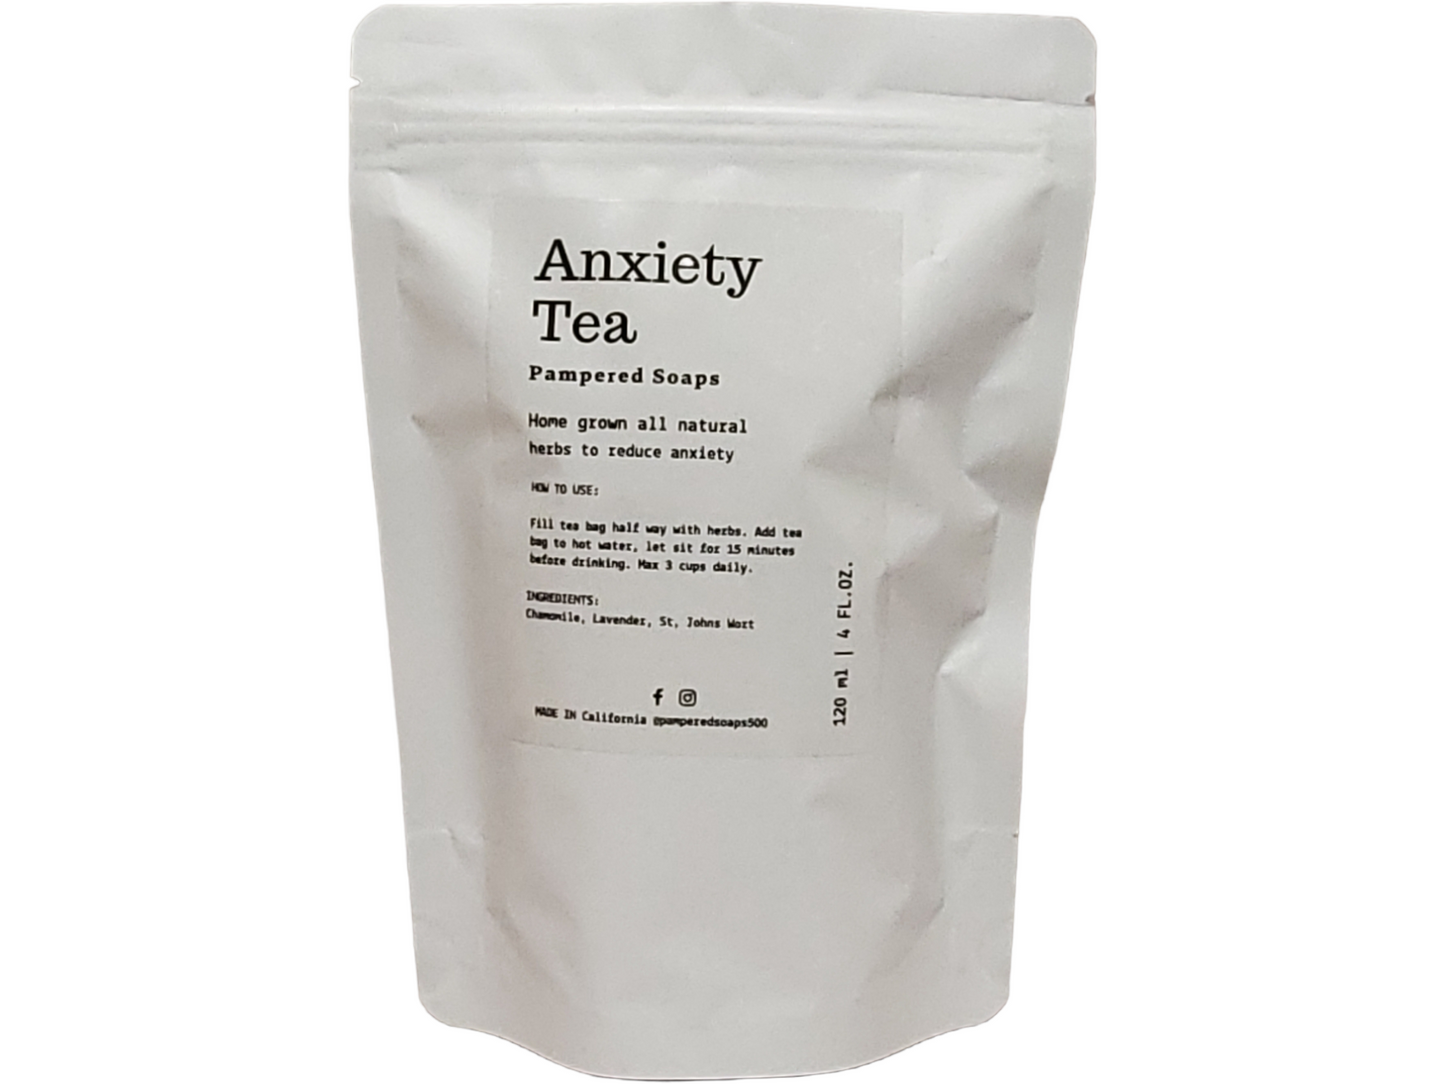 Anxiety Free Tea Pampered Soaps